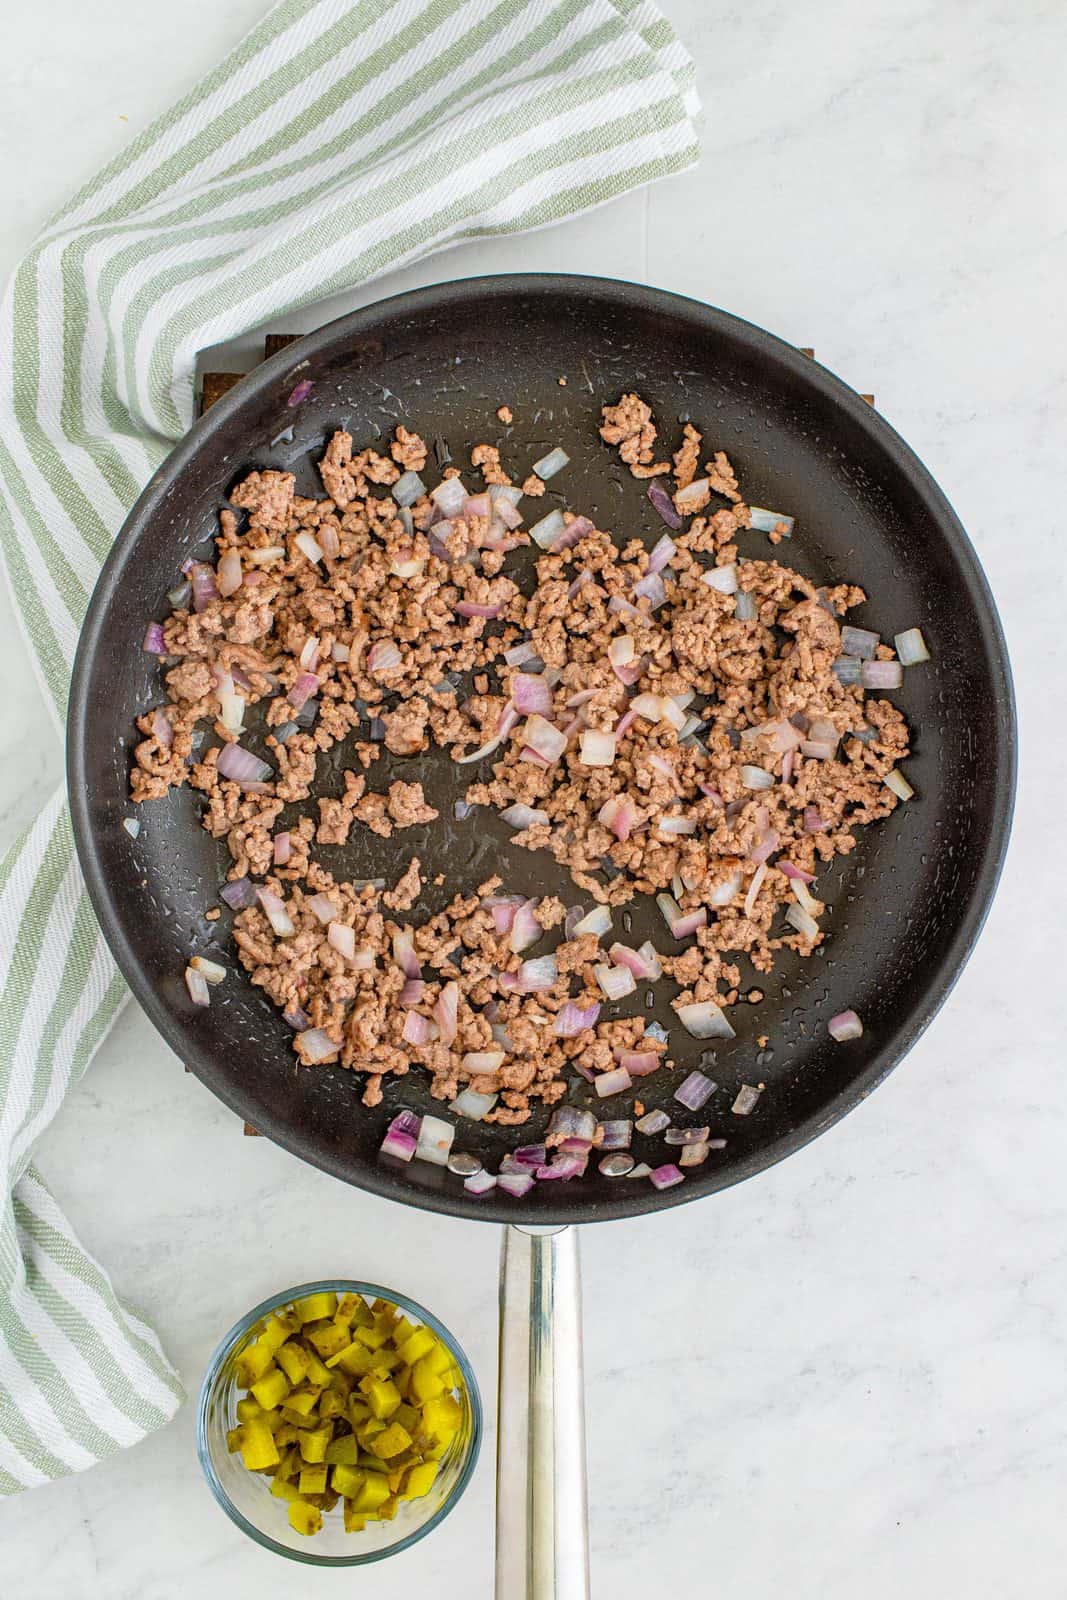 Ground beef and onions browned in pan.